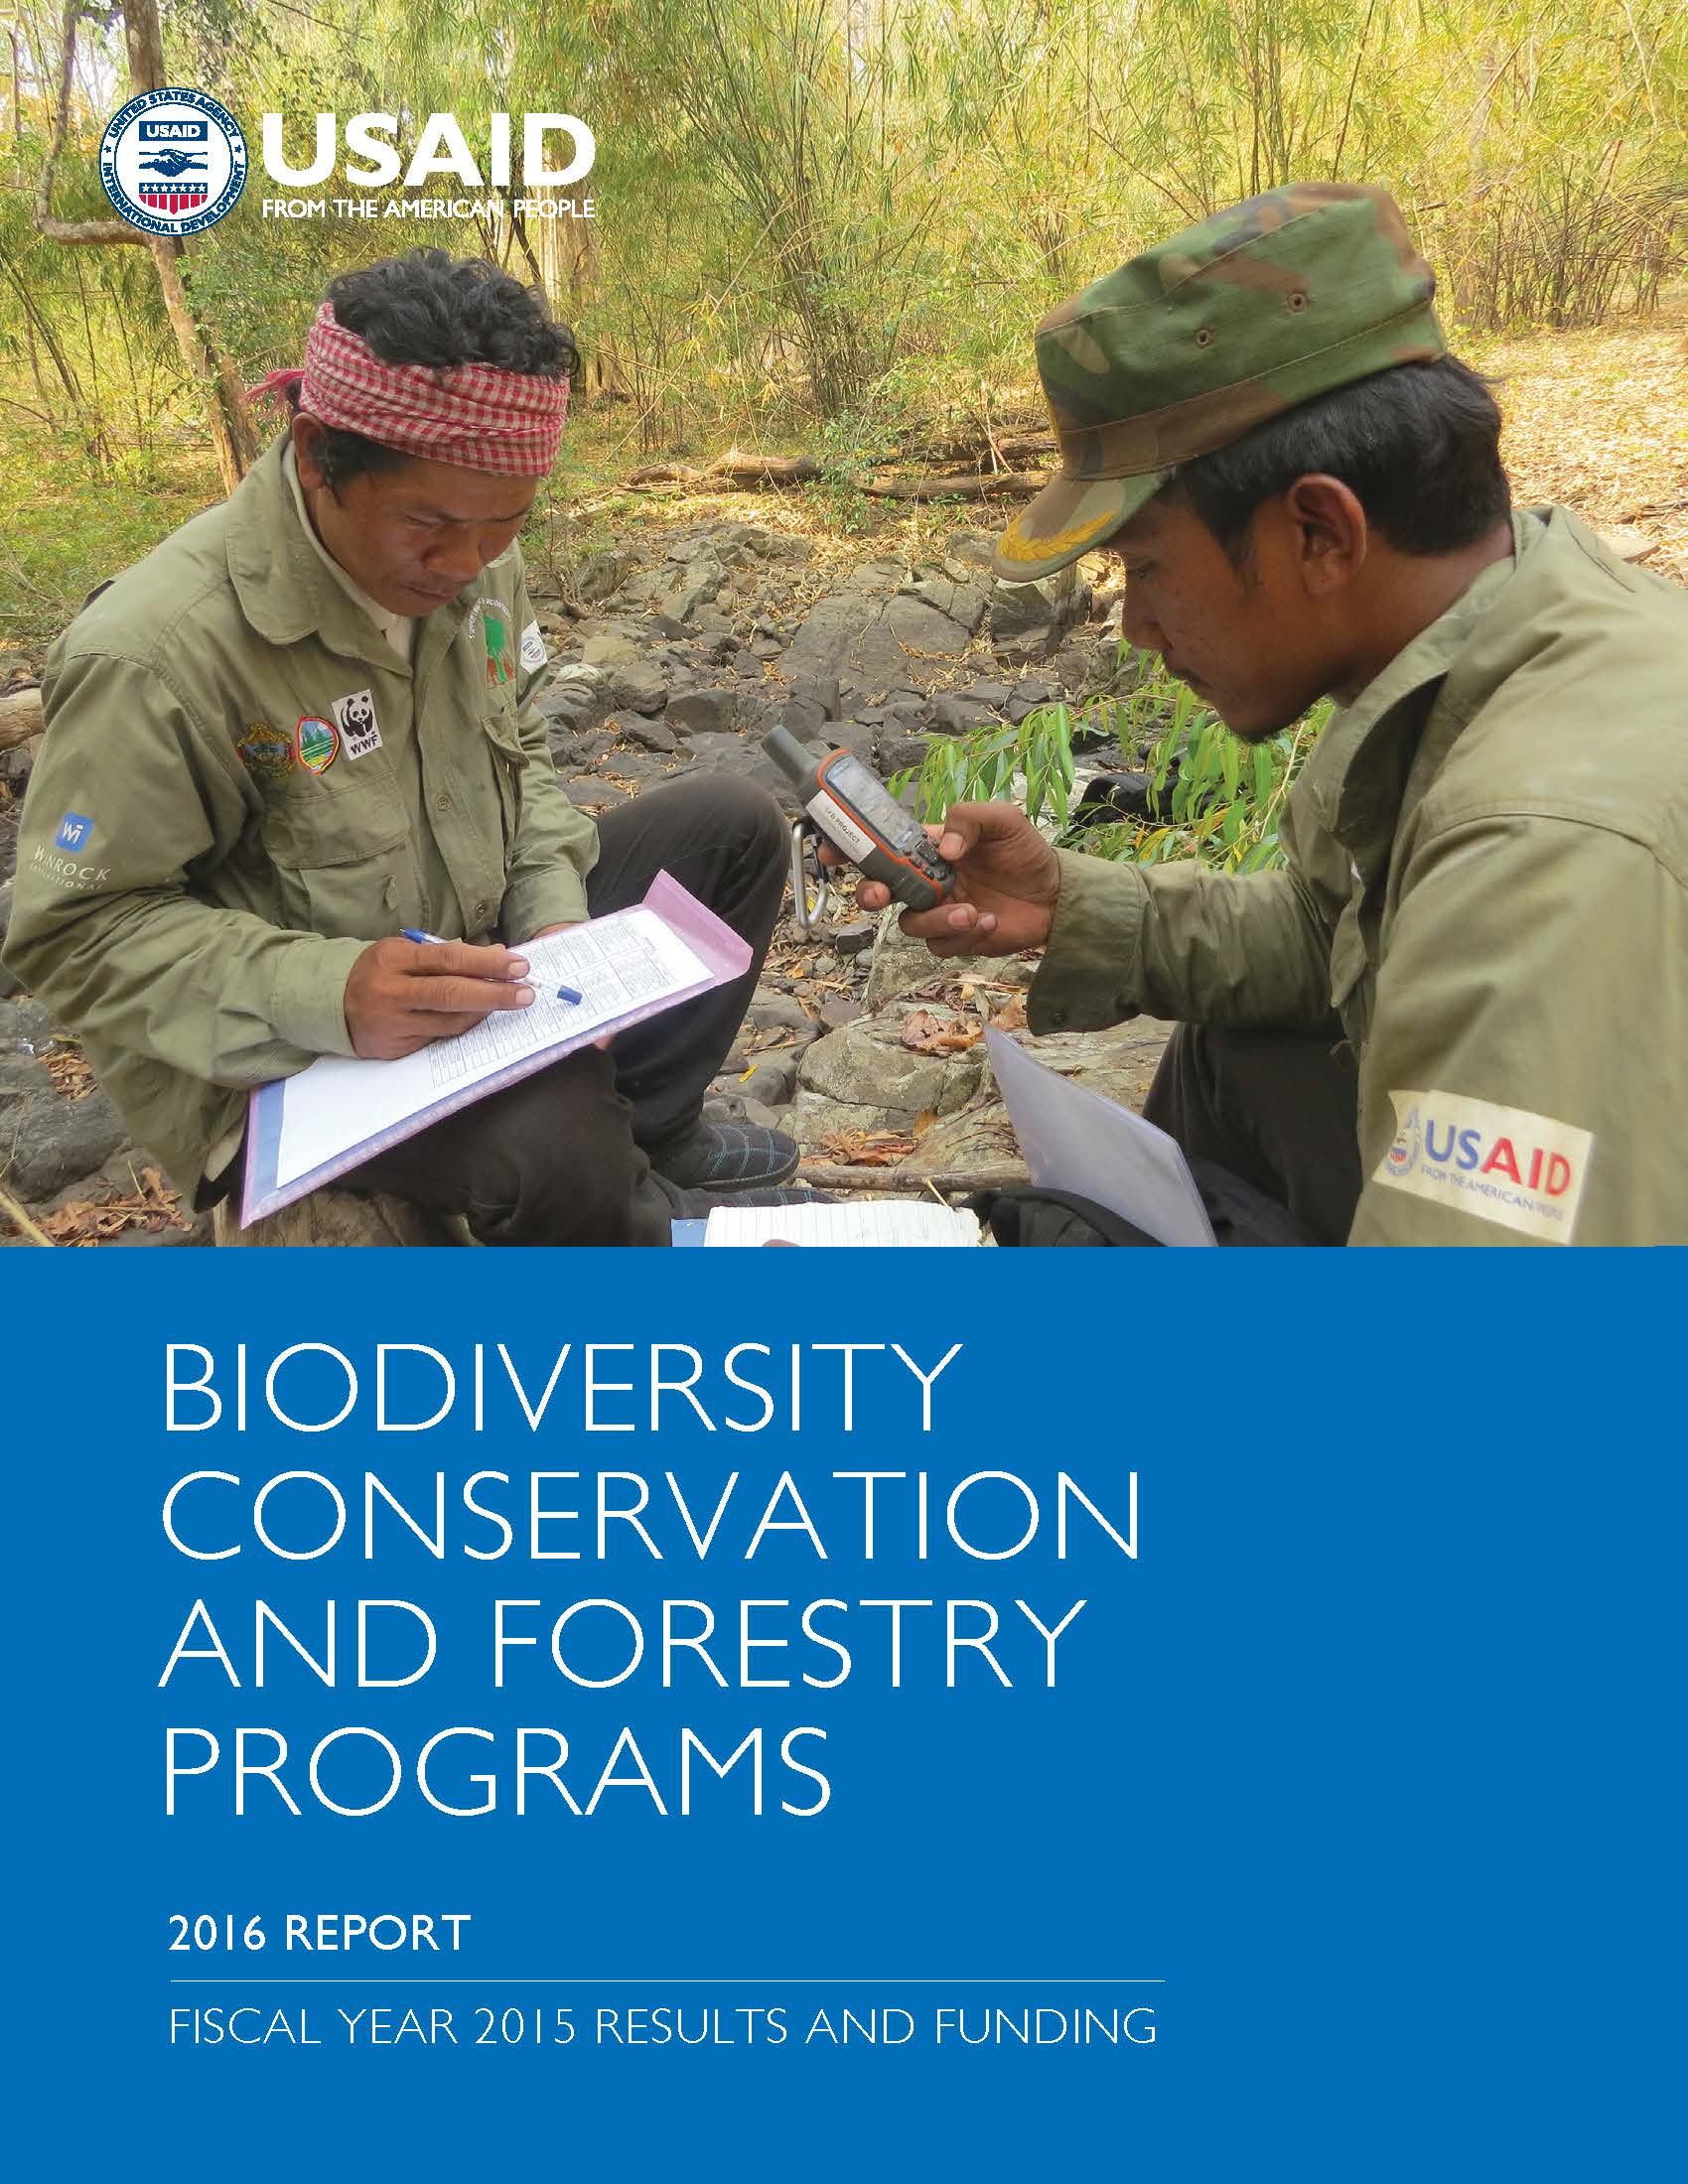 USAID's Biodiversity Conservation and Forestry Programs, 2016 Report